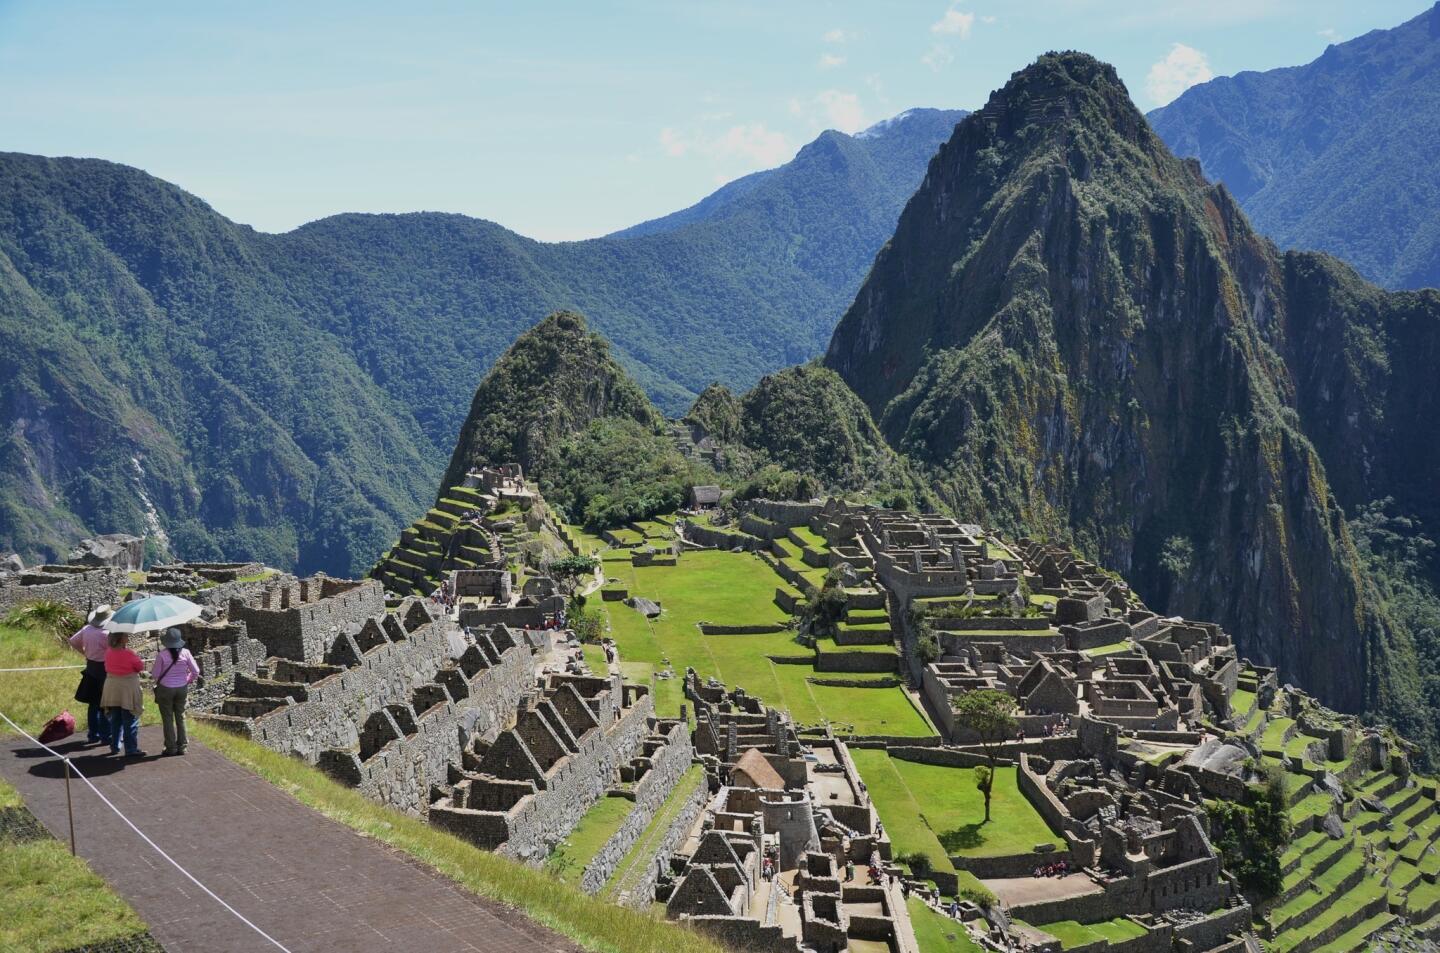 Peru: What's missing here?